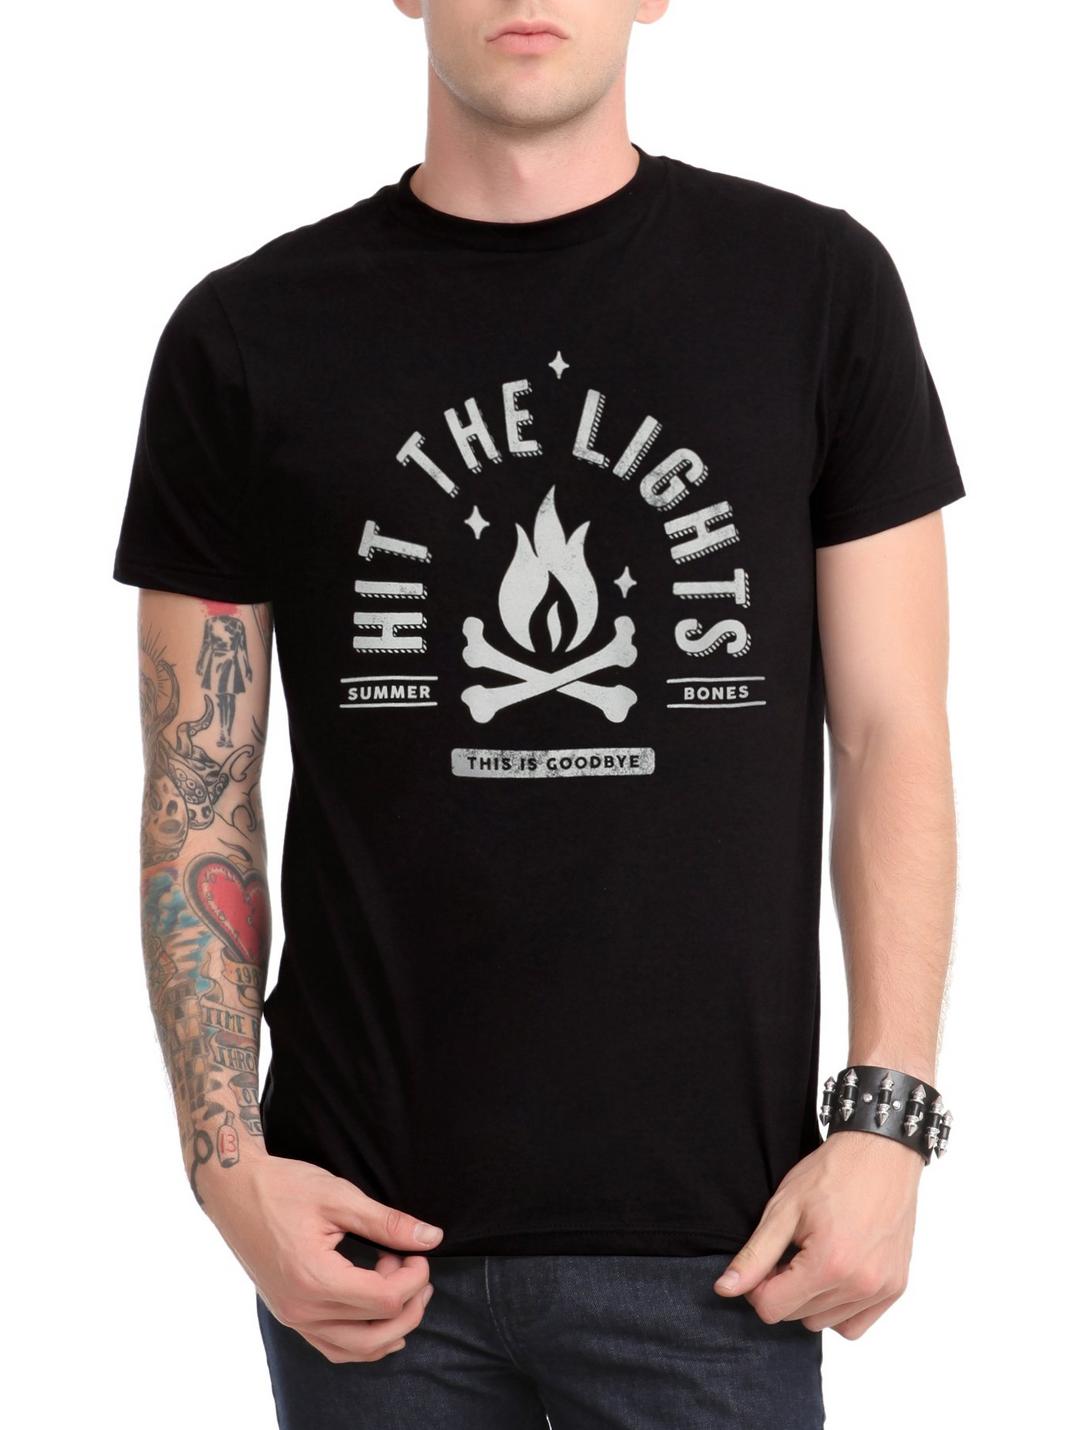 Hit The Lights This Is Goodbye T-Shirt, BLACK, hi-res